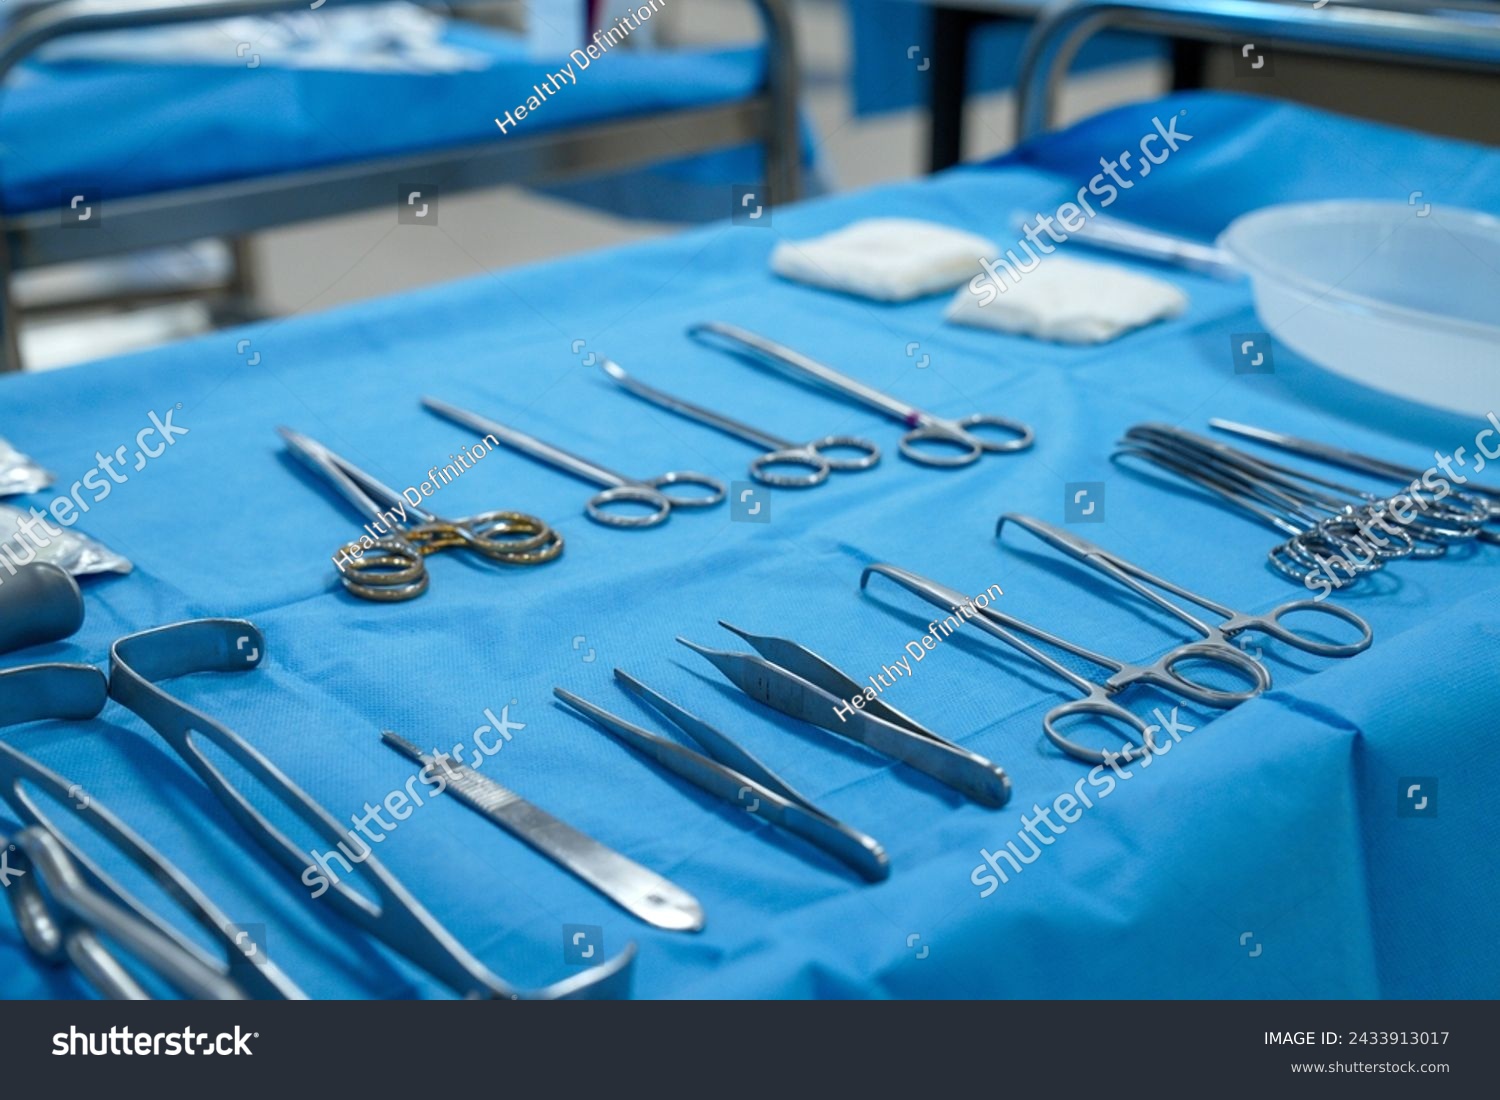 Sterile surgical instruments and tools including scalpels, scissors, forceps and tweezers arranged on a table for a surgery, Sterilized surgical instruments on the blue wrap	 #2433913017